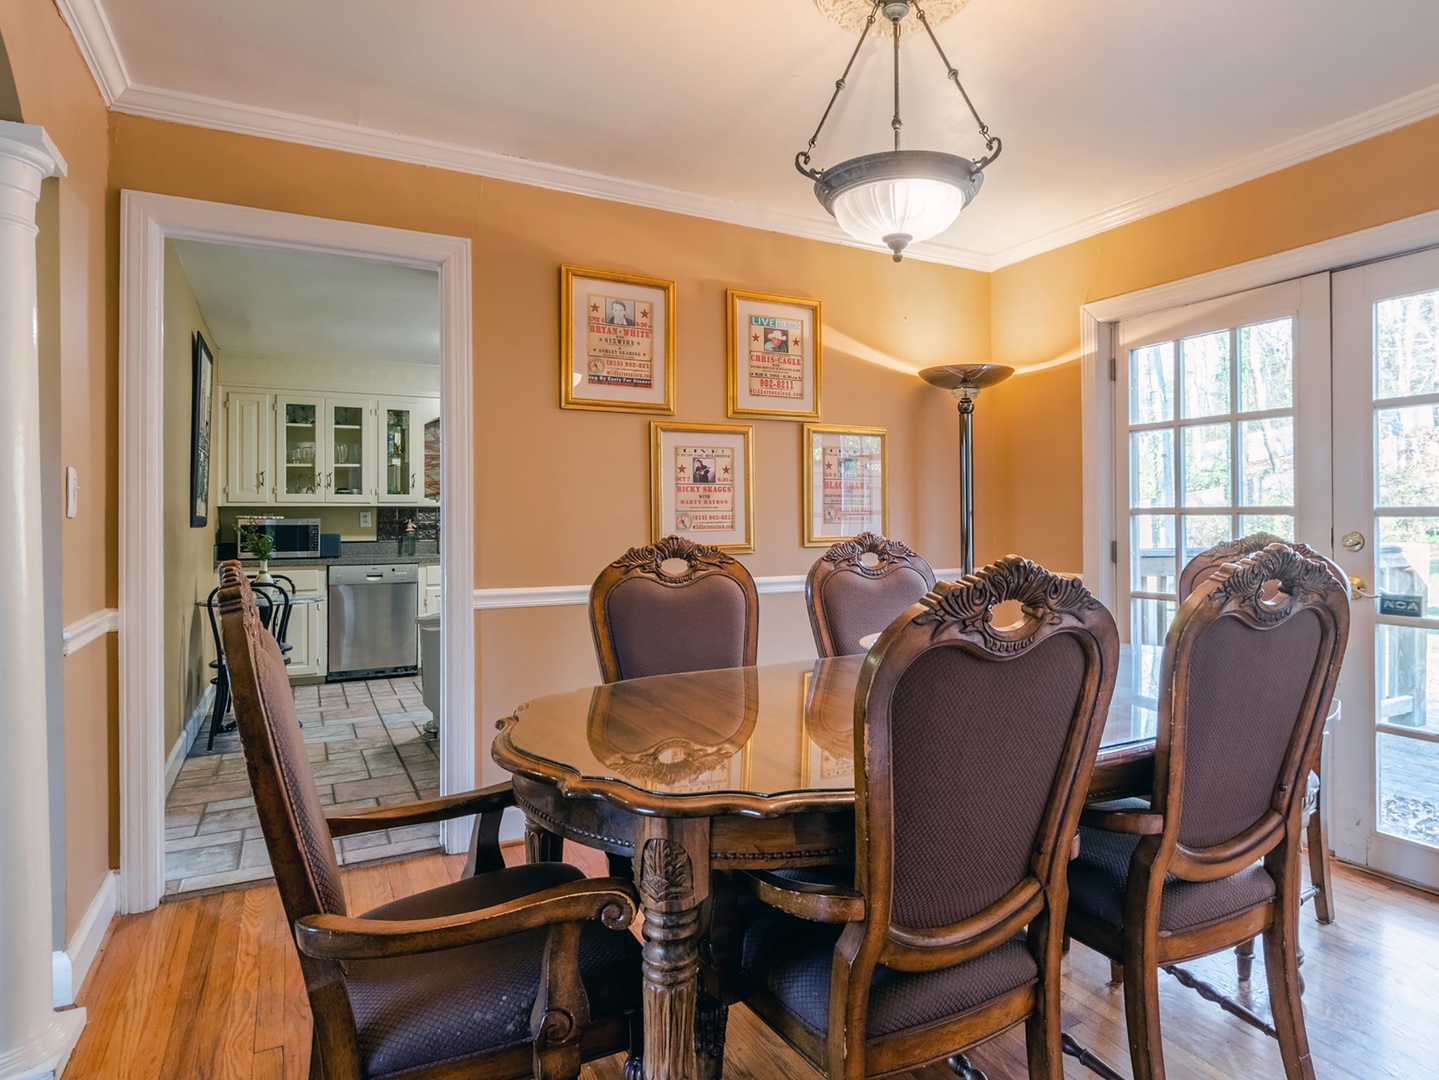 Dining room room with table seating for 8